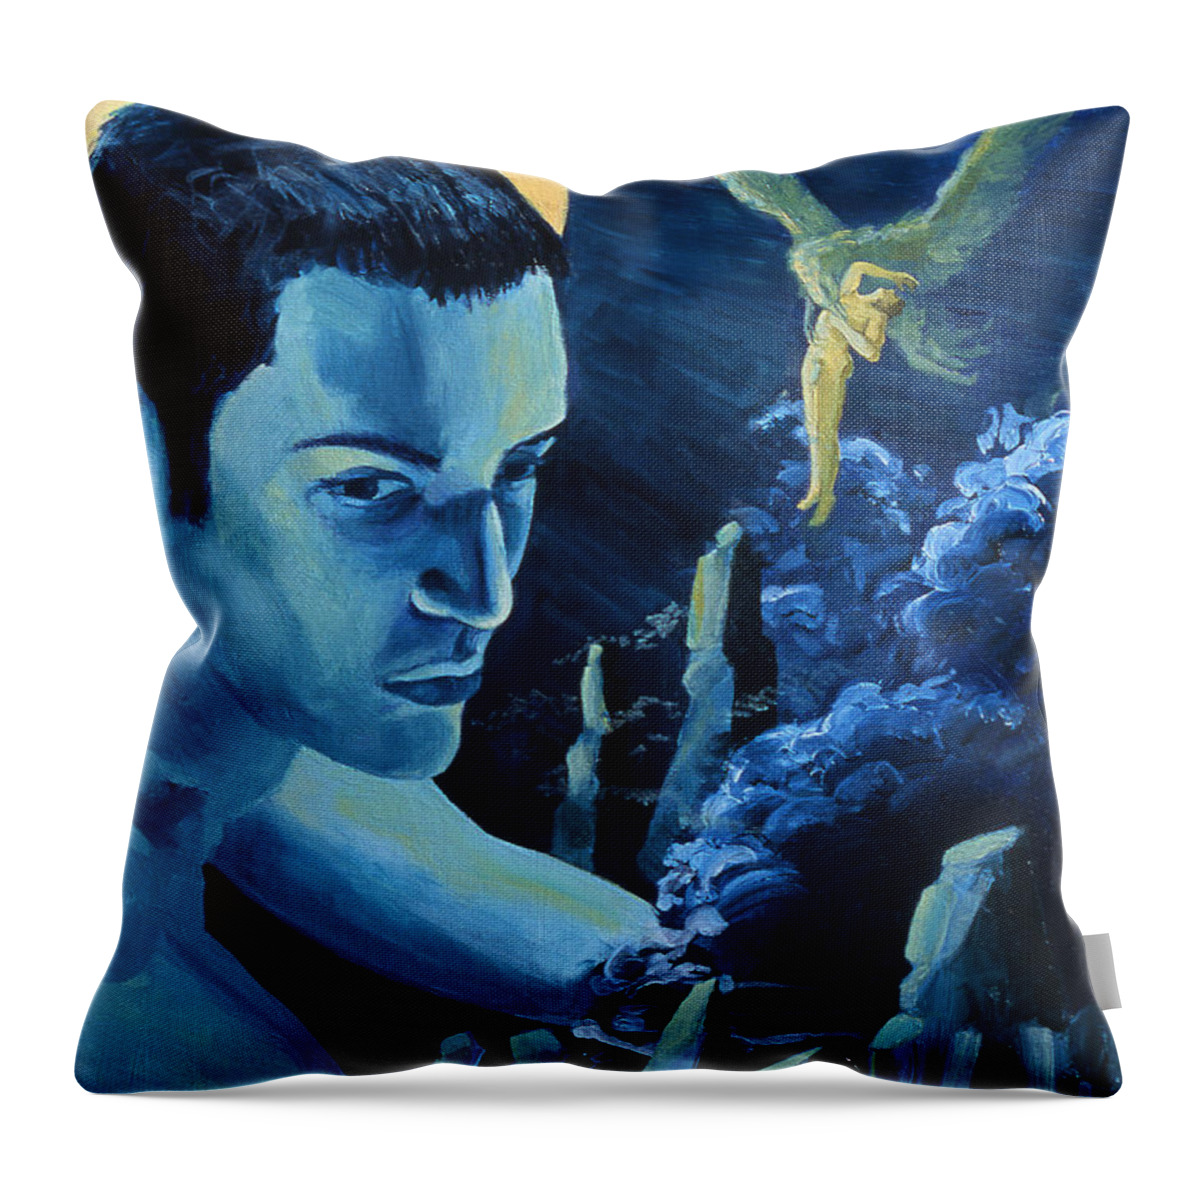 Mythology Throw Pillow featuring the painting Yellow Moon by Rene Capone